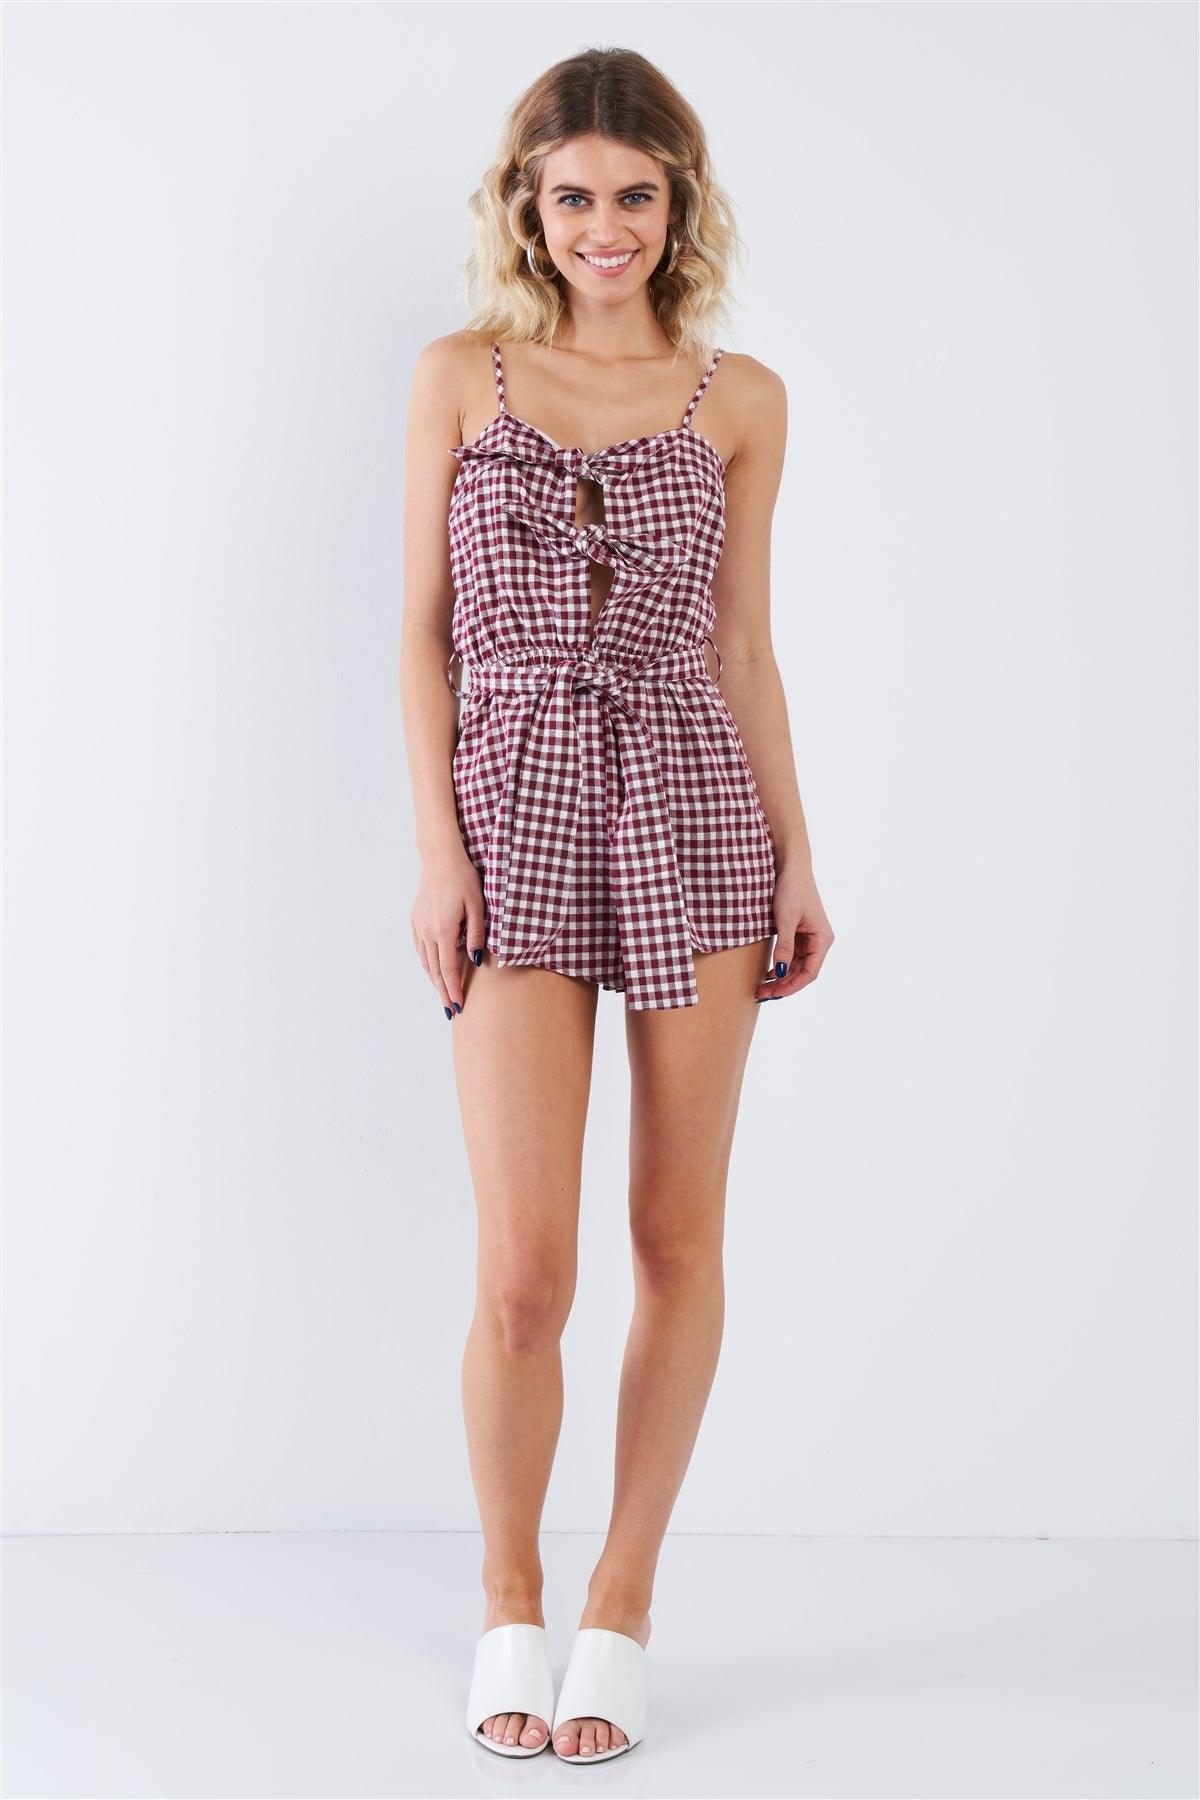 Wine Checkered Layered Bow Cut Out Short Romper  /3-2-1